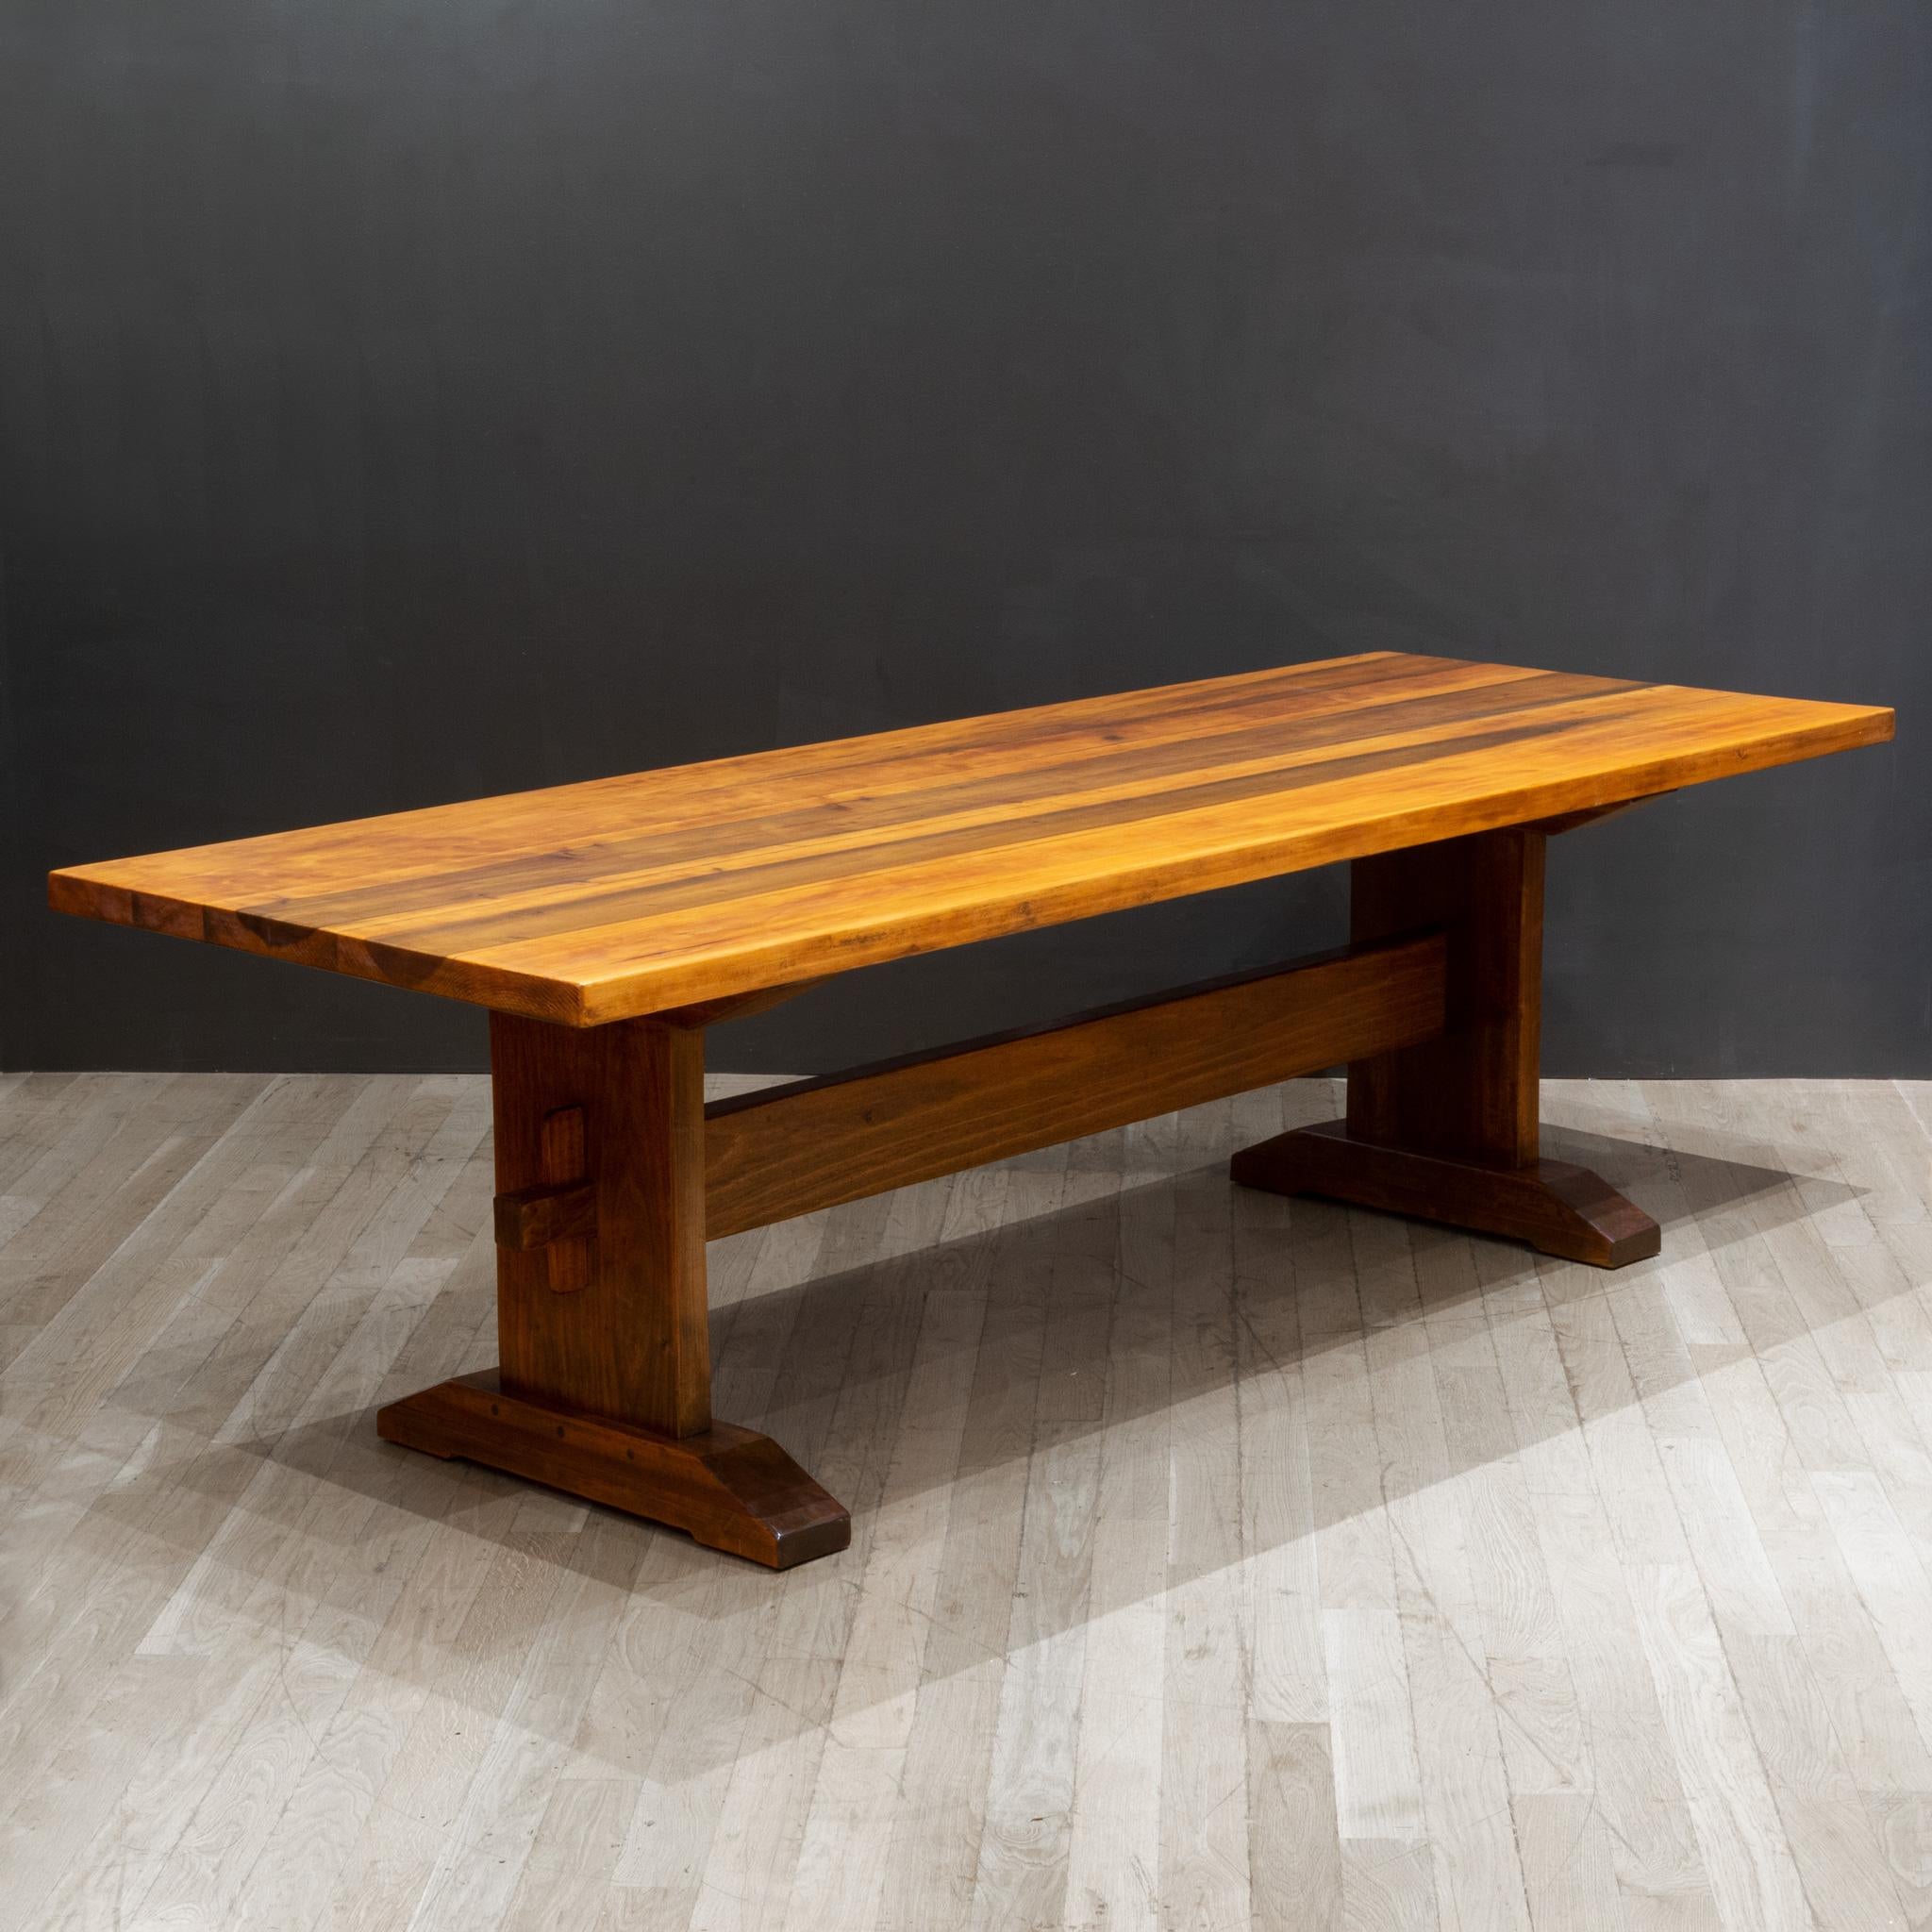 Rustic Hand Crafted Solid Douglas Fir Trestle Dining Table c.1972-Signed For Sale